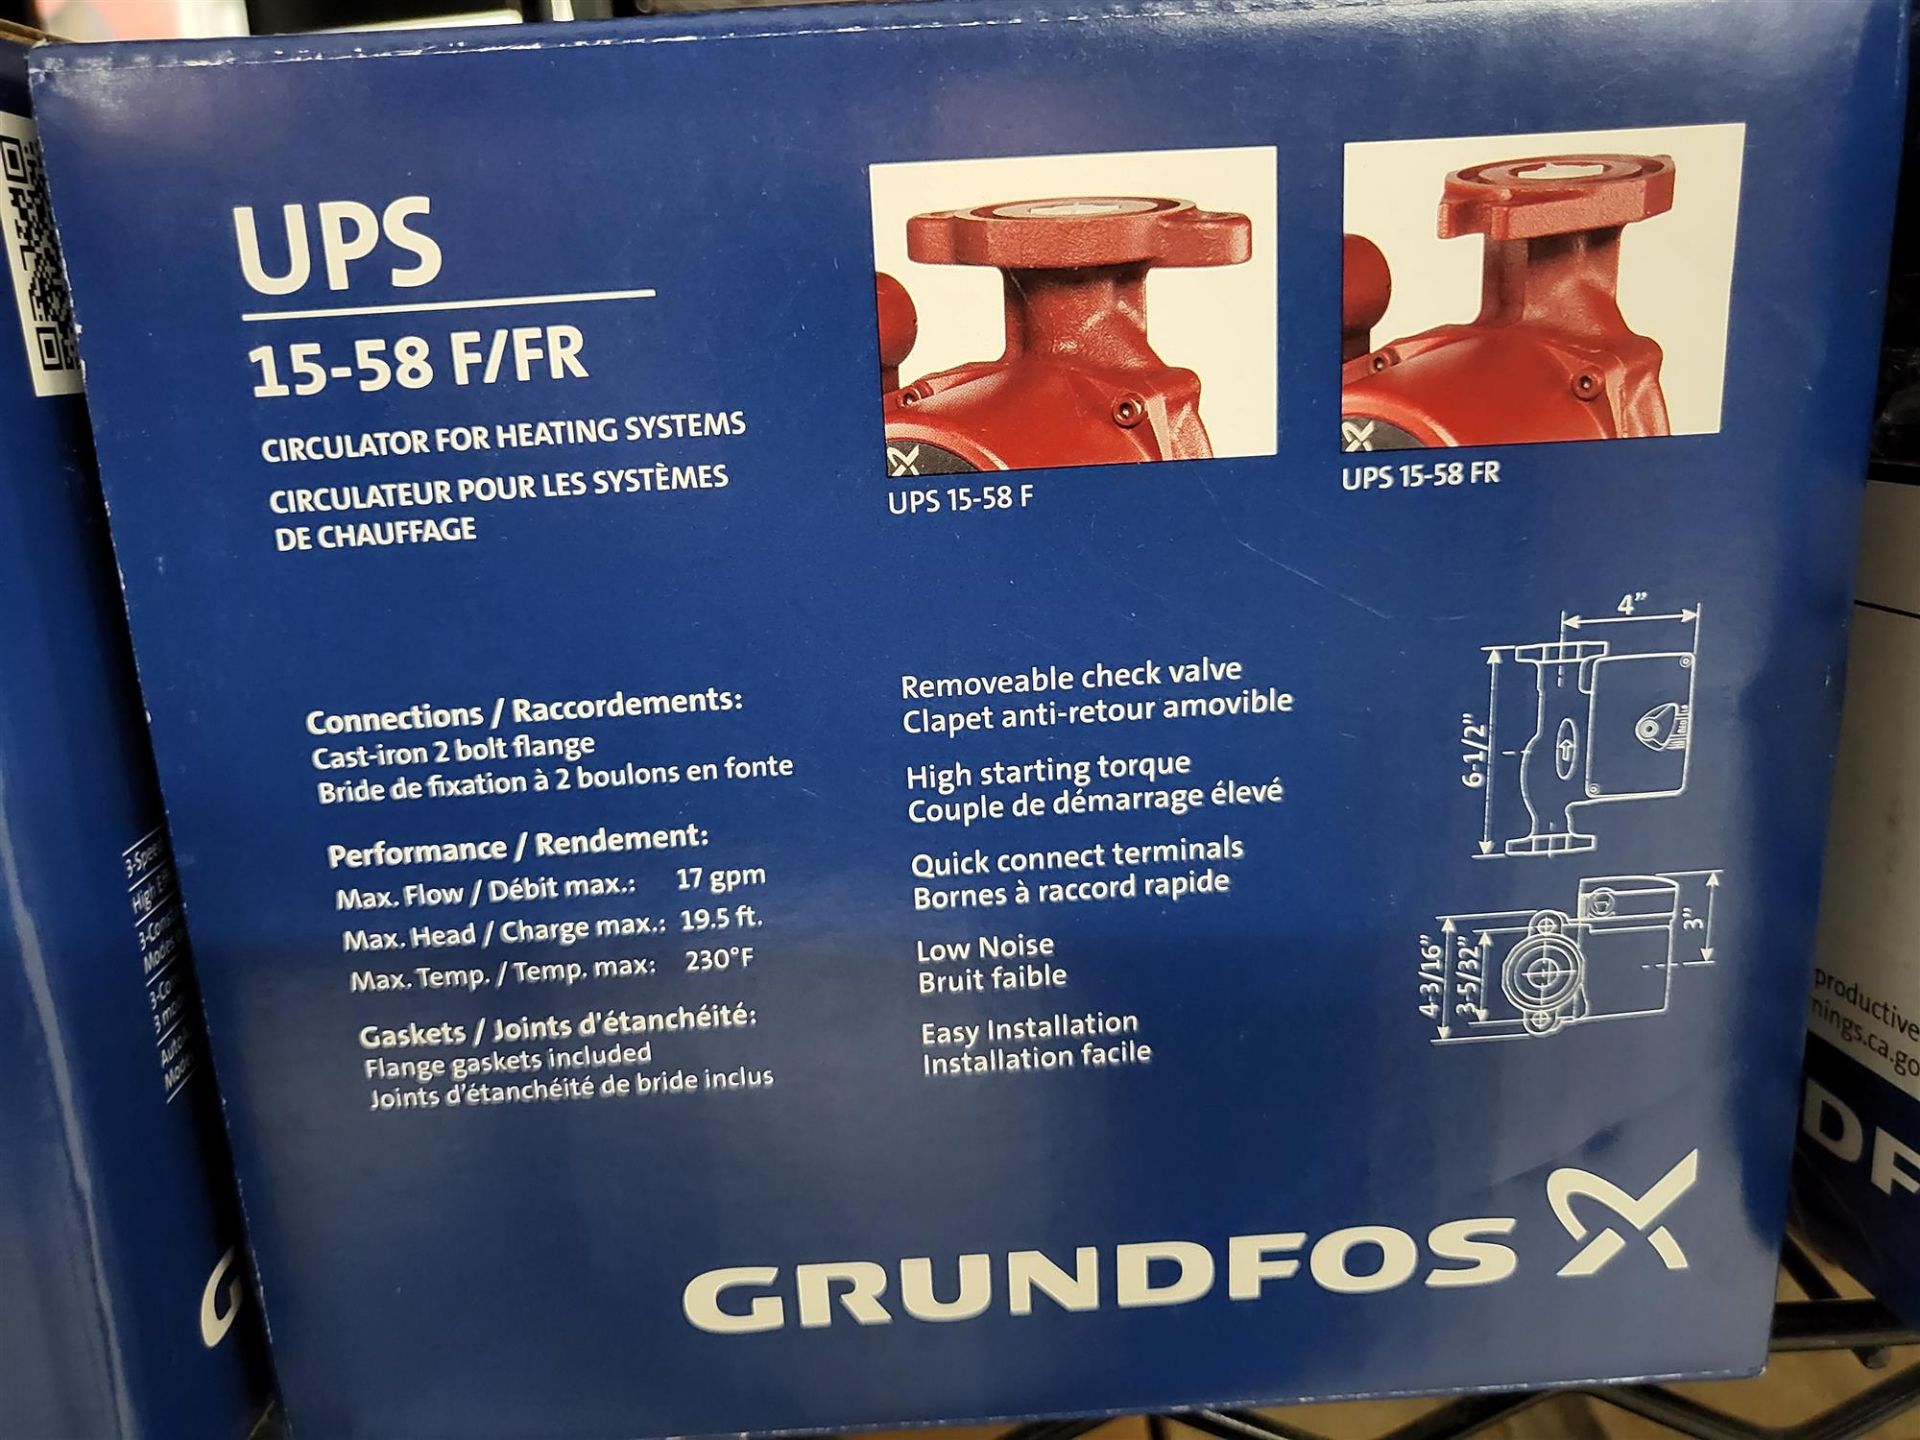 Grundfos UPS - 15-58 F/FR - Circulator for Heating Systems - Image 2 of 2